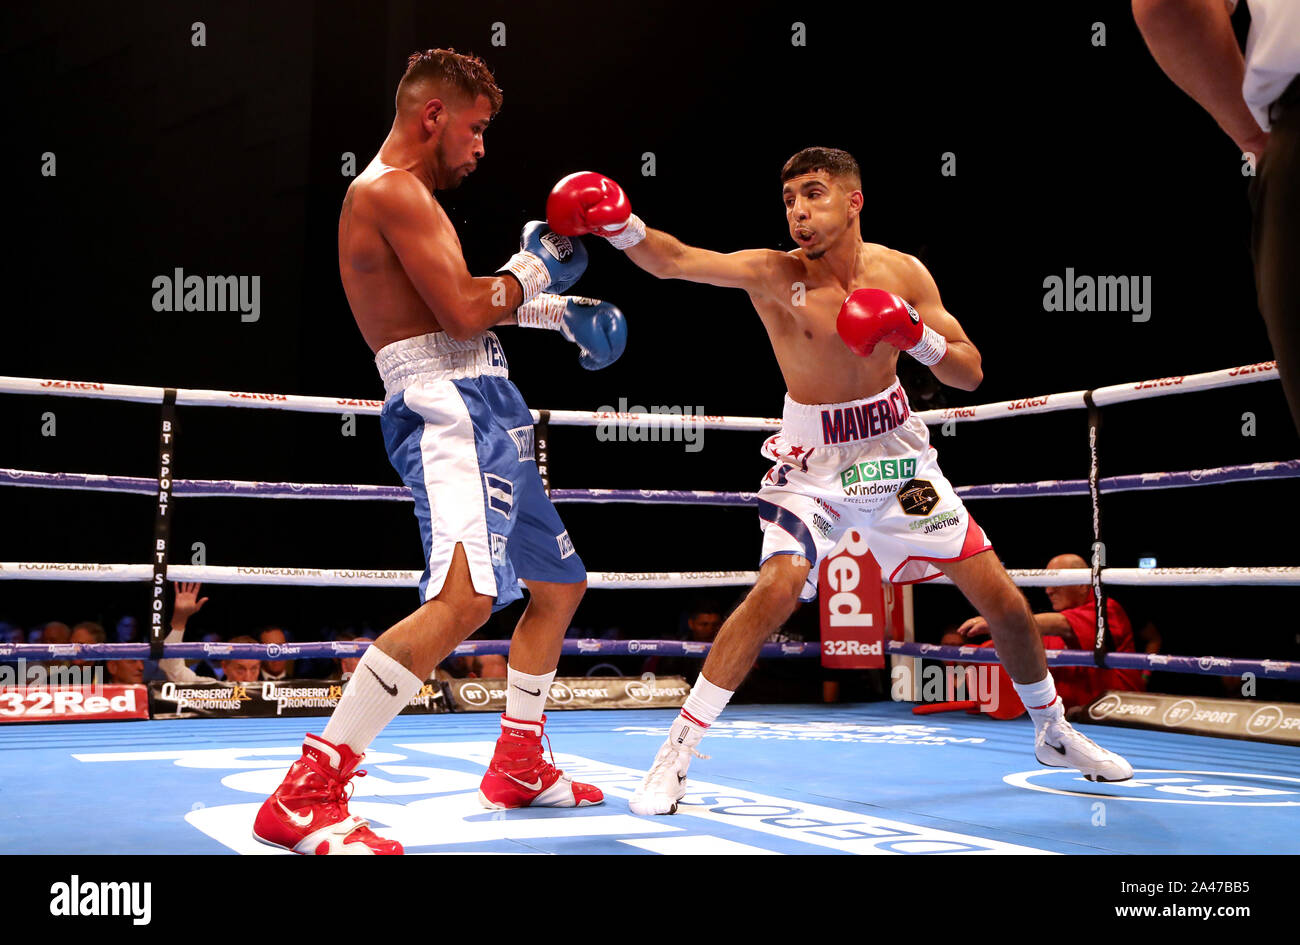 Shabazz Masoud (right) and Yesner Talavera in the International Featherweight Contest at First Direct Arena, Leeds. Stock Photo